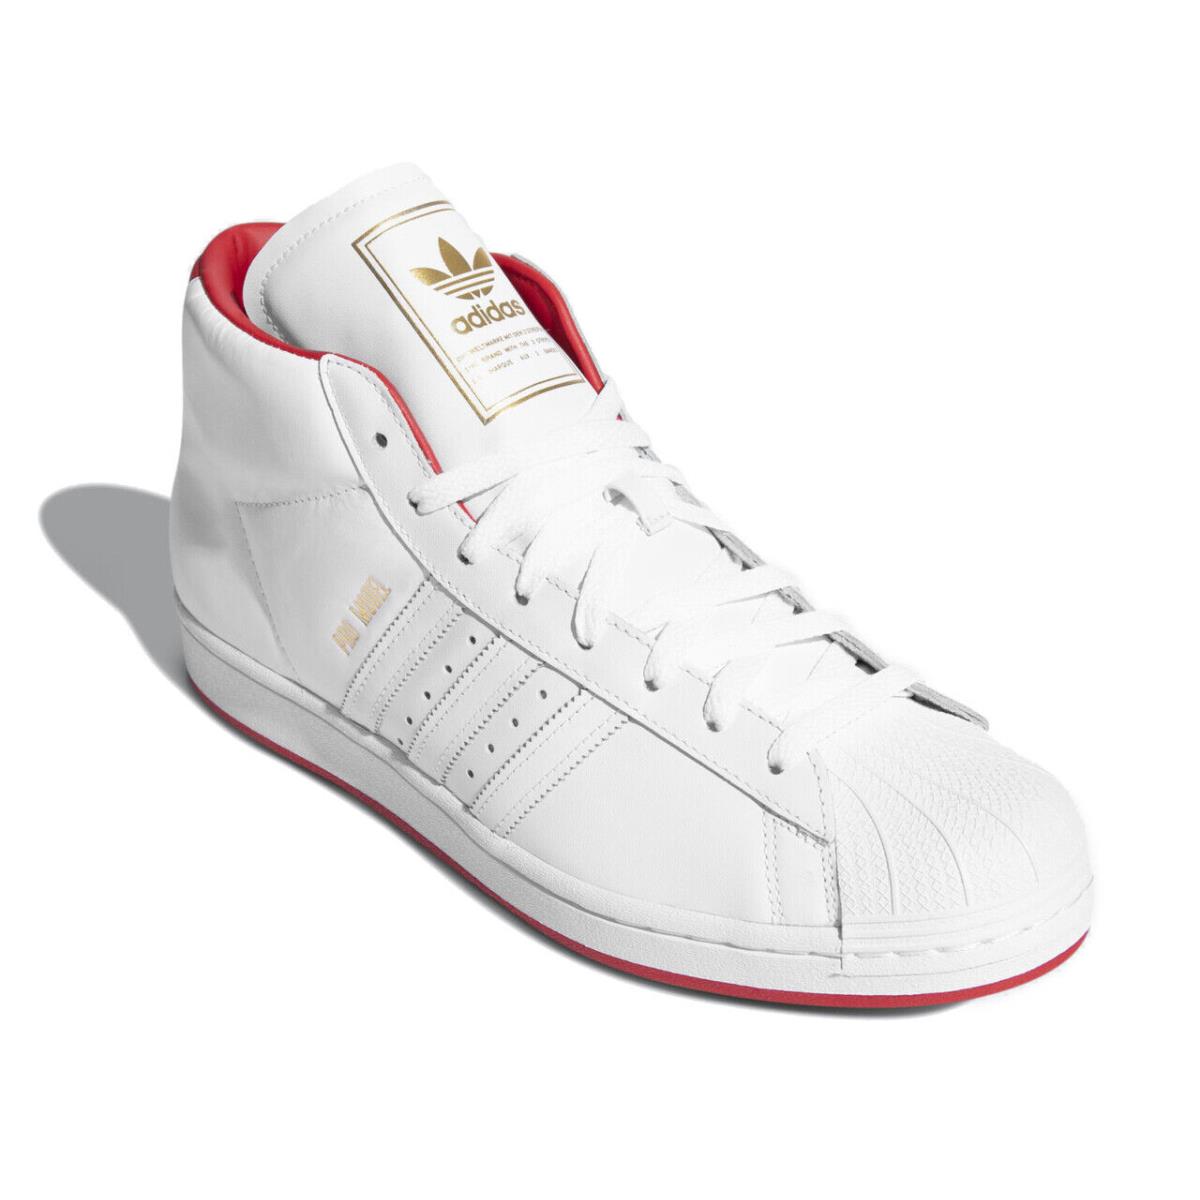 Size 8 Mens Adidas Originals Pro Model White and Red Lace-up Sneakers FX7825 - White